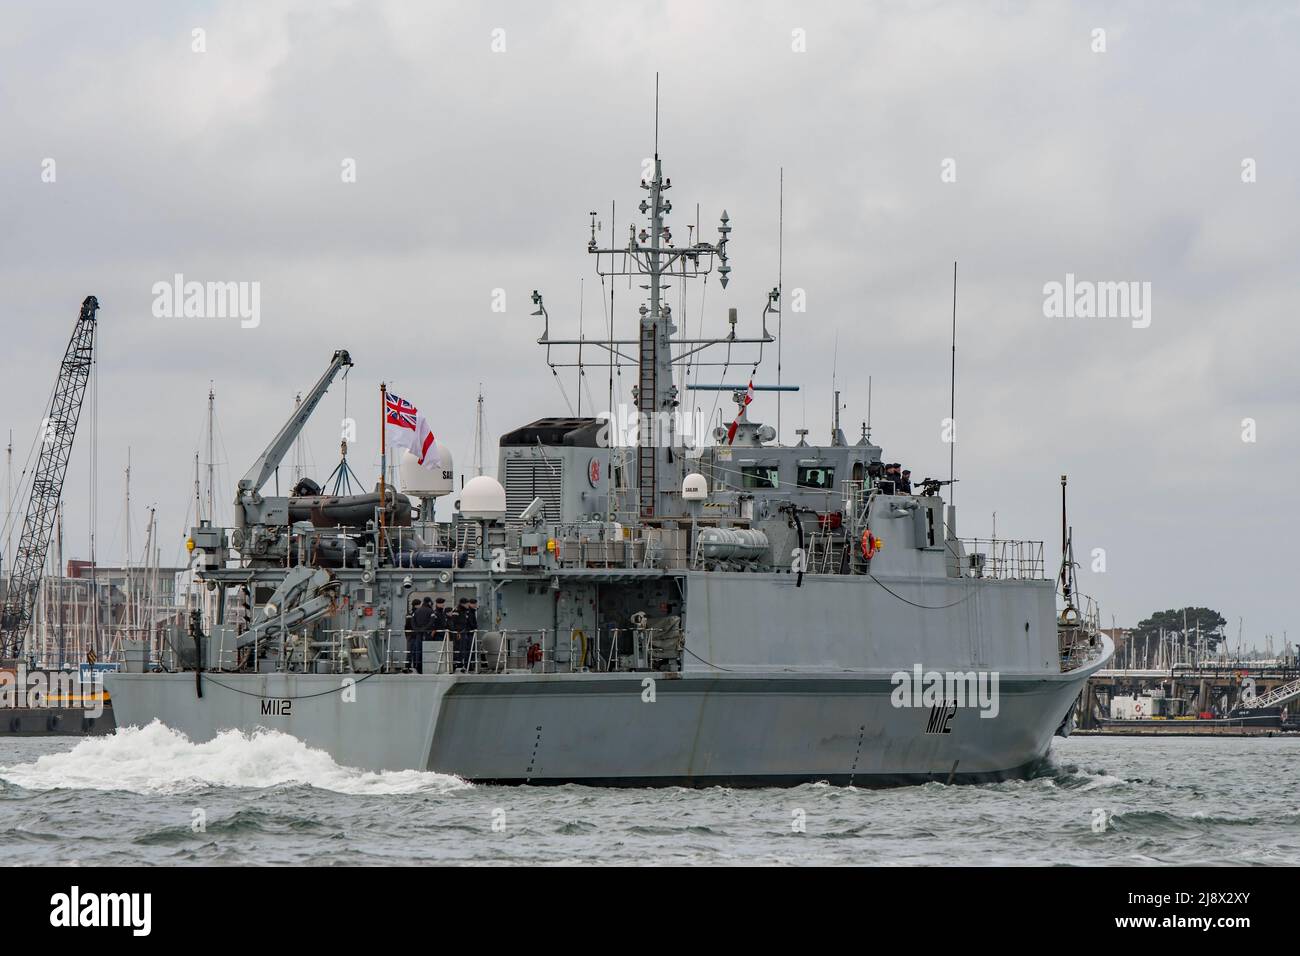 The Royal Navy mine warfare vessel HMS Shoreham (M112) in Portsmouth Harbour, UK on the 16th May 2022 for a rare port visit prior to decommissioning. Stock Photo